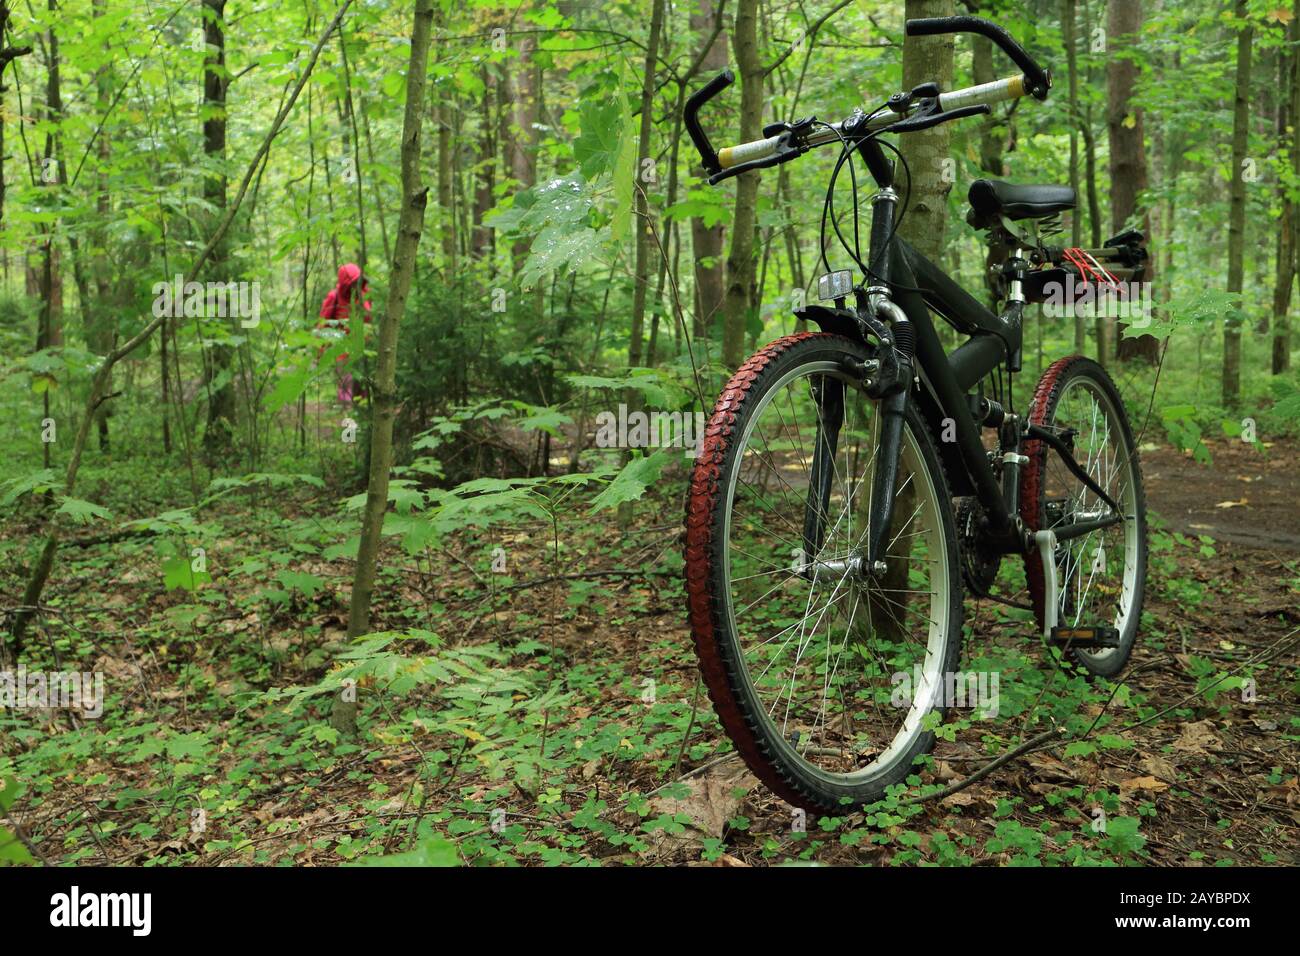 green forest bike in the foreground Stock Photo